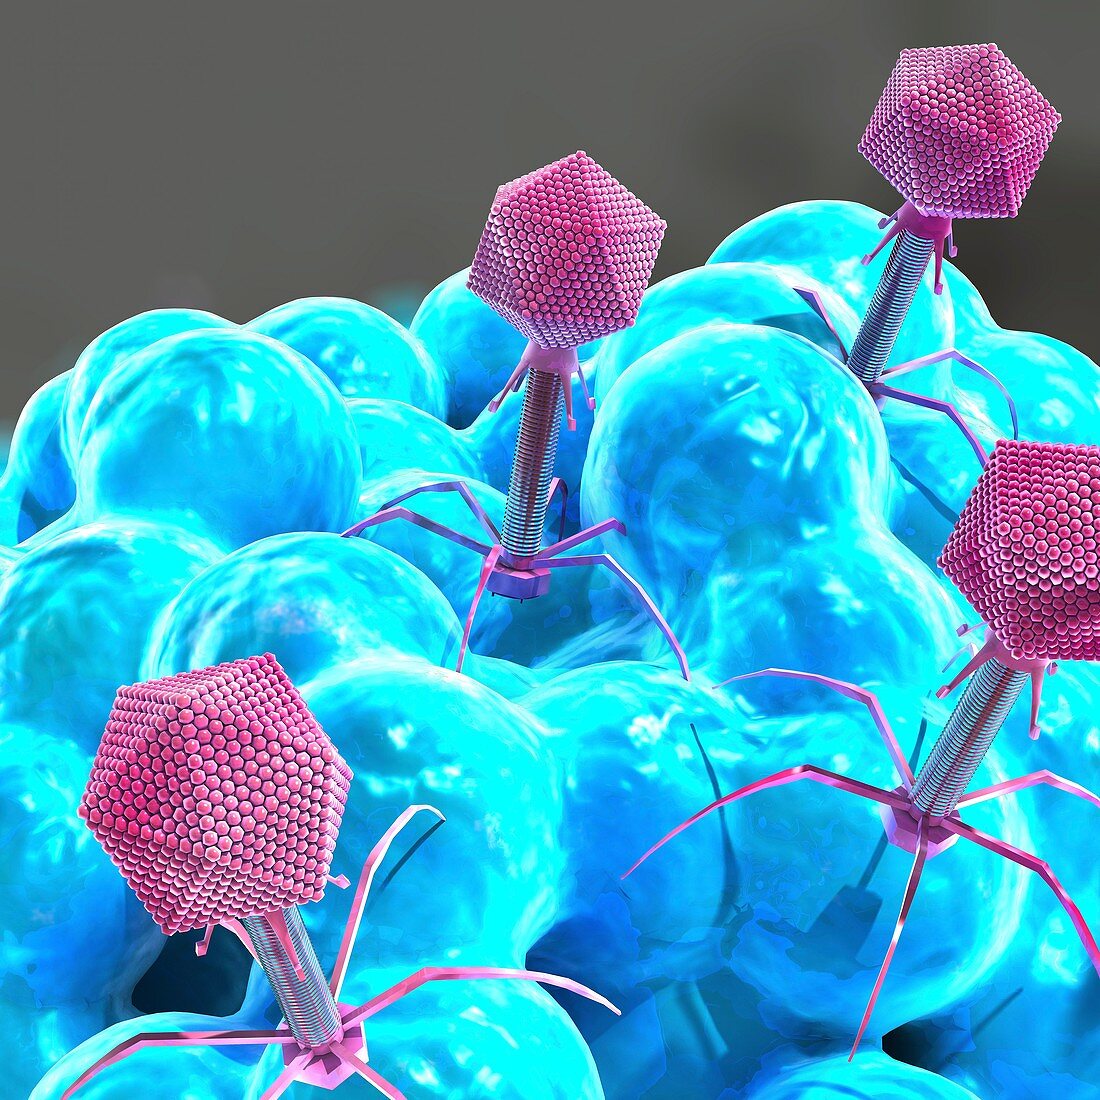 Bacteriophages infecting bacterium, illustration